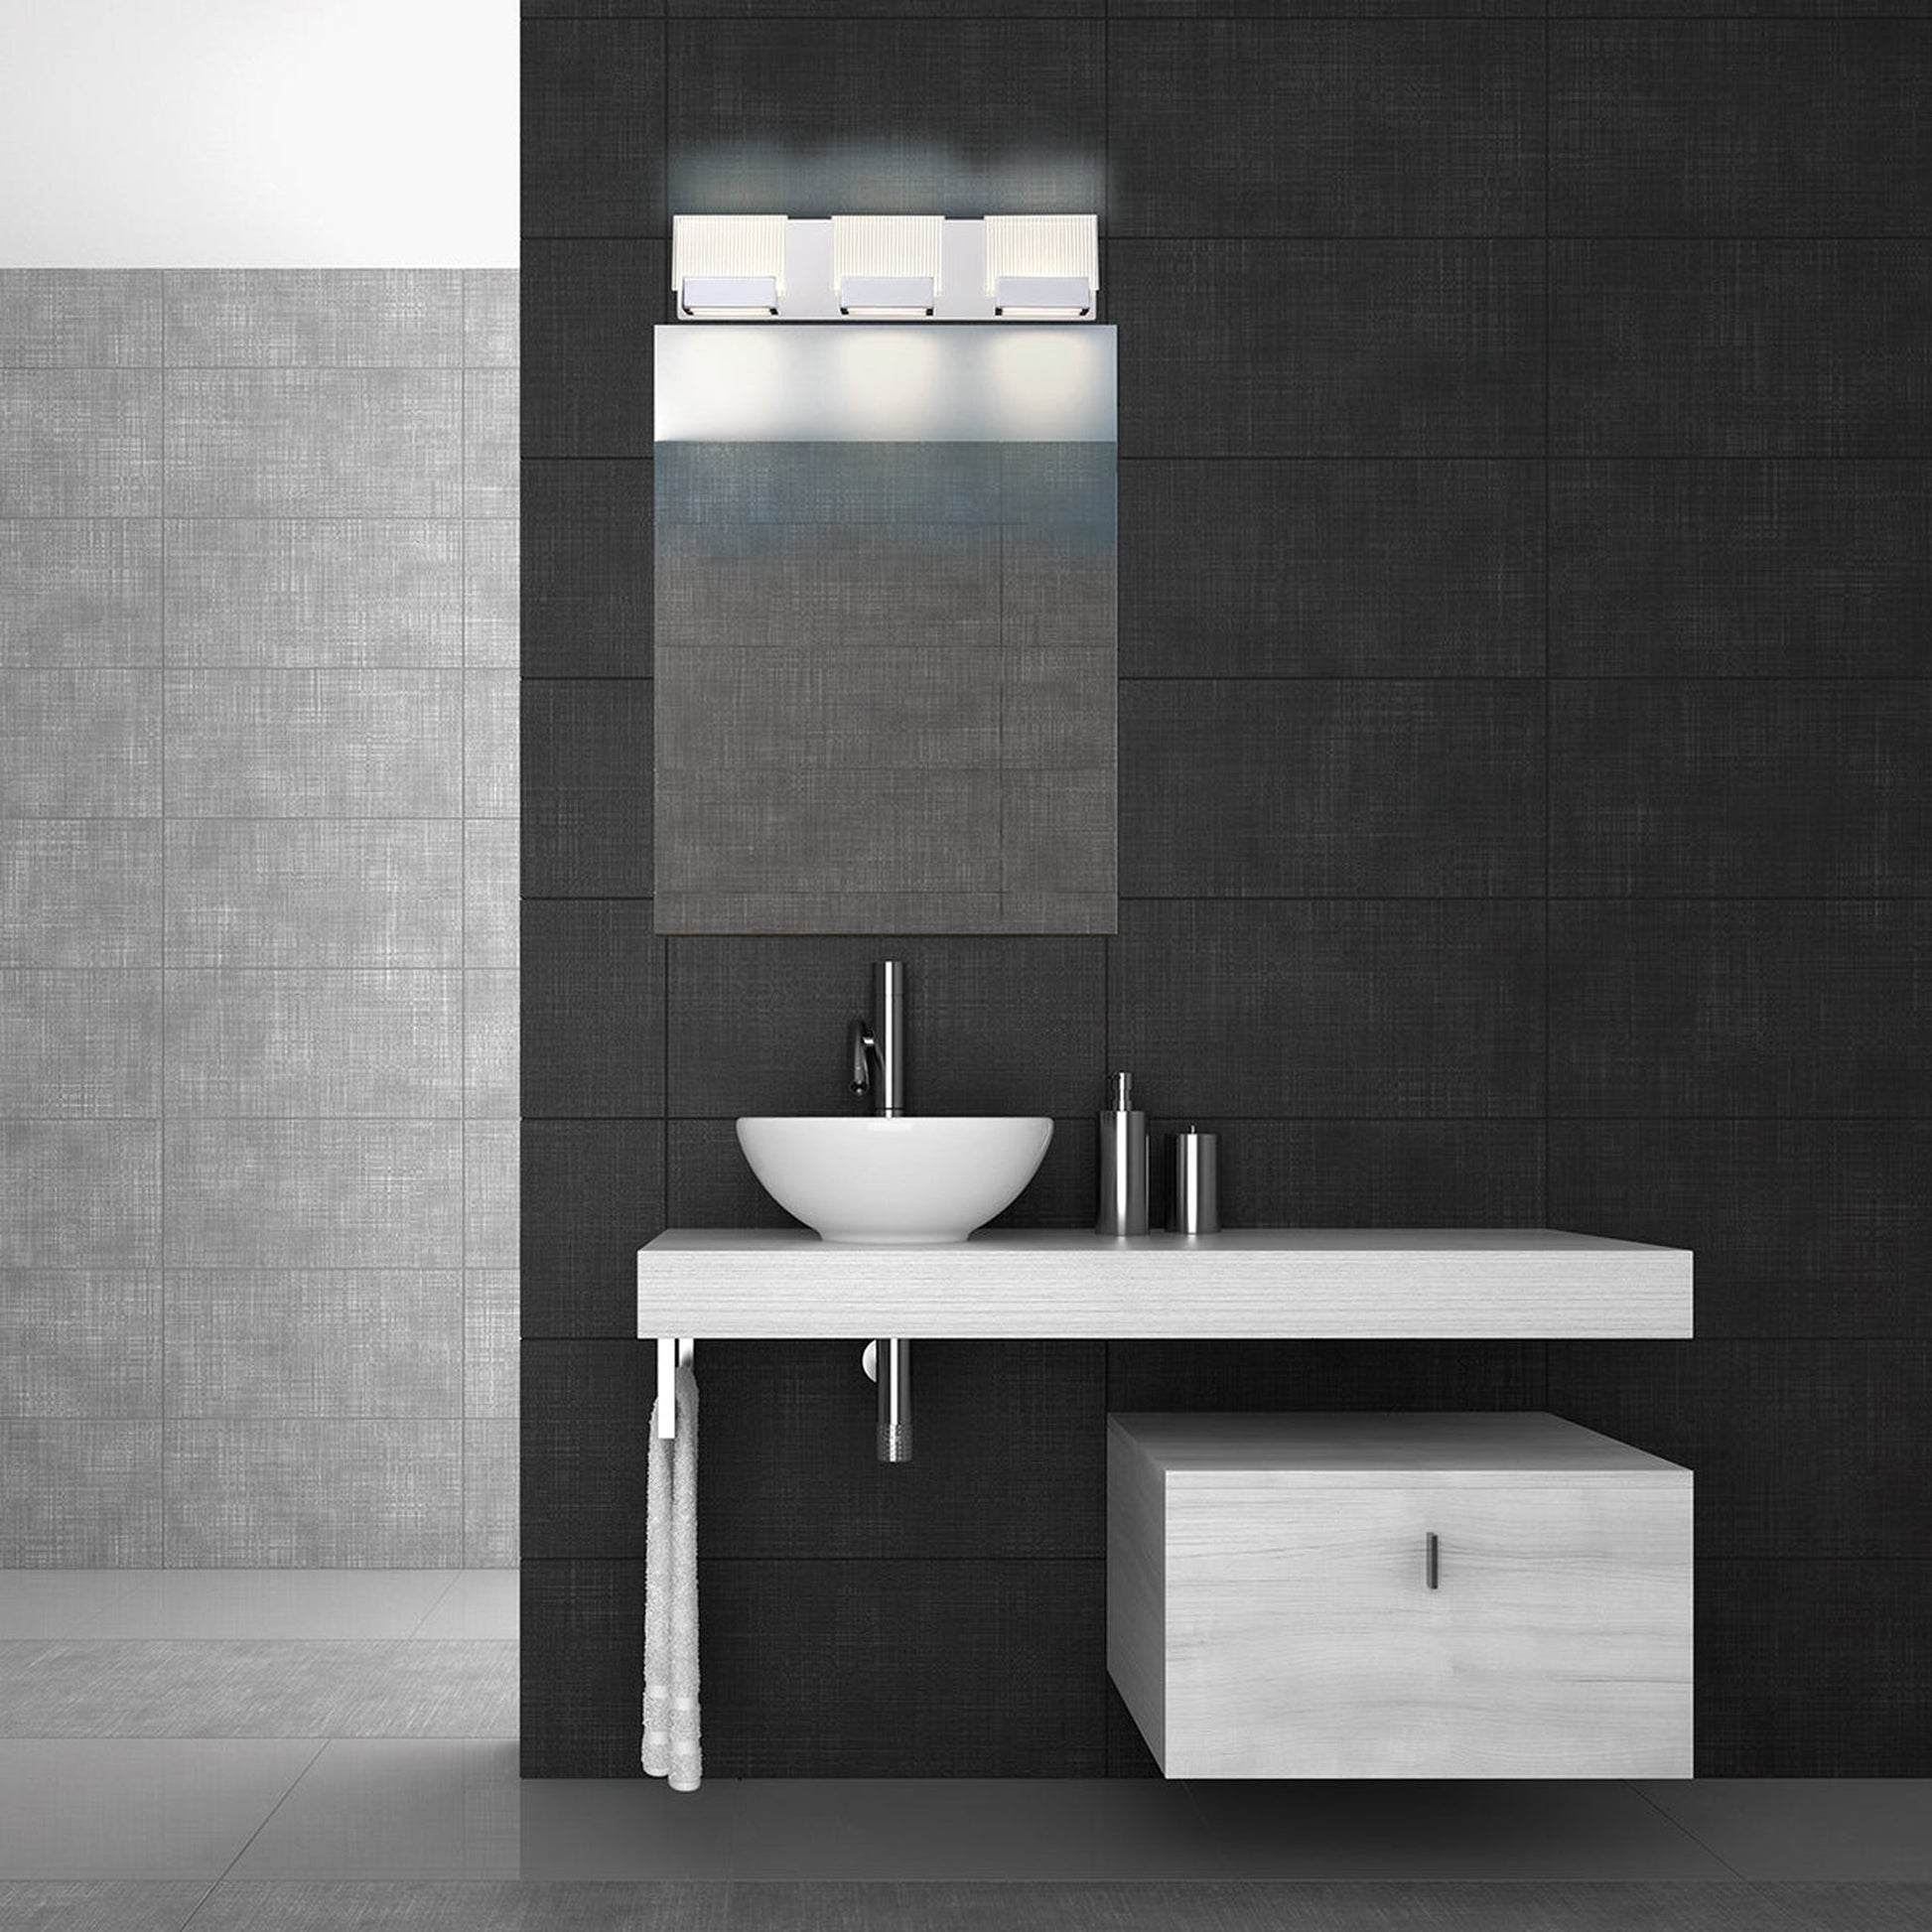 Eurofase Lighting Sonic 22" 3-Light Dimmable Integrated LED Chrome Bath Bar With Etched Glass Shades